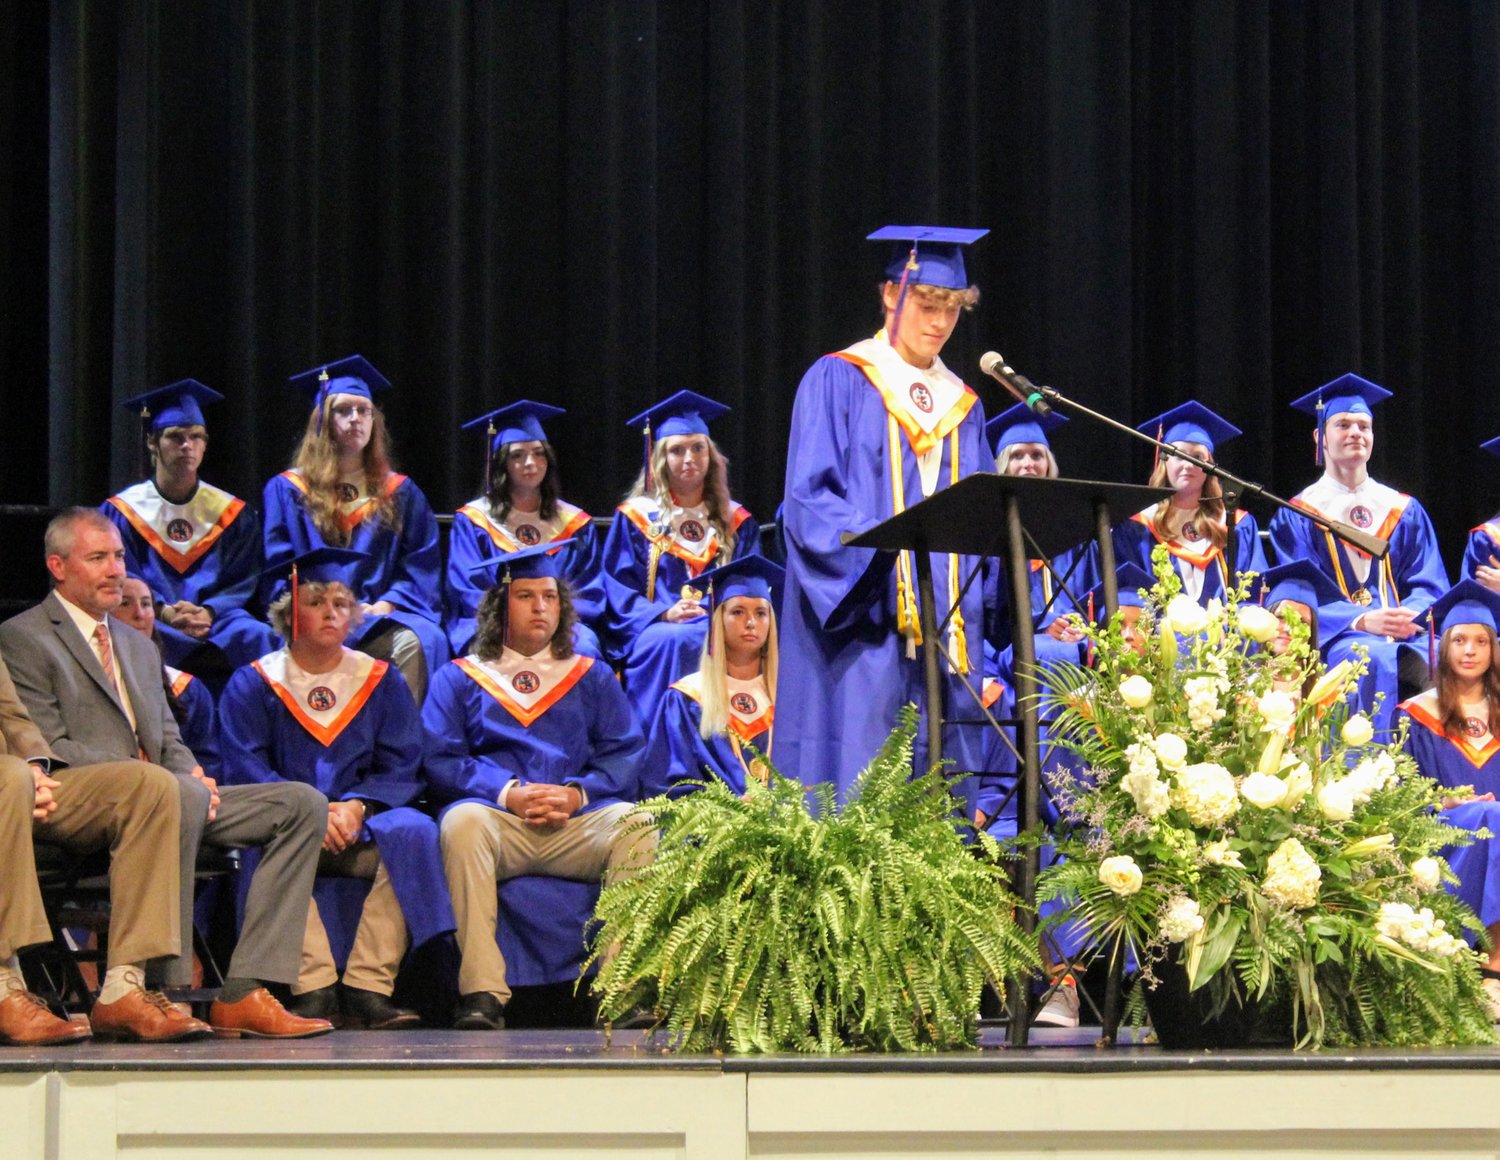 Mr. Orange Beach High School, Jackson Richtmyer, thanked his family, teachers, coaches, the school staff and the community for supporting the entire class of 2022.